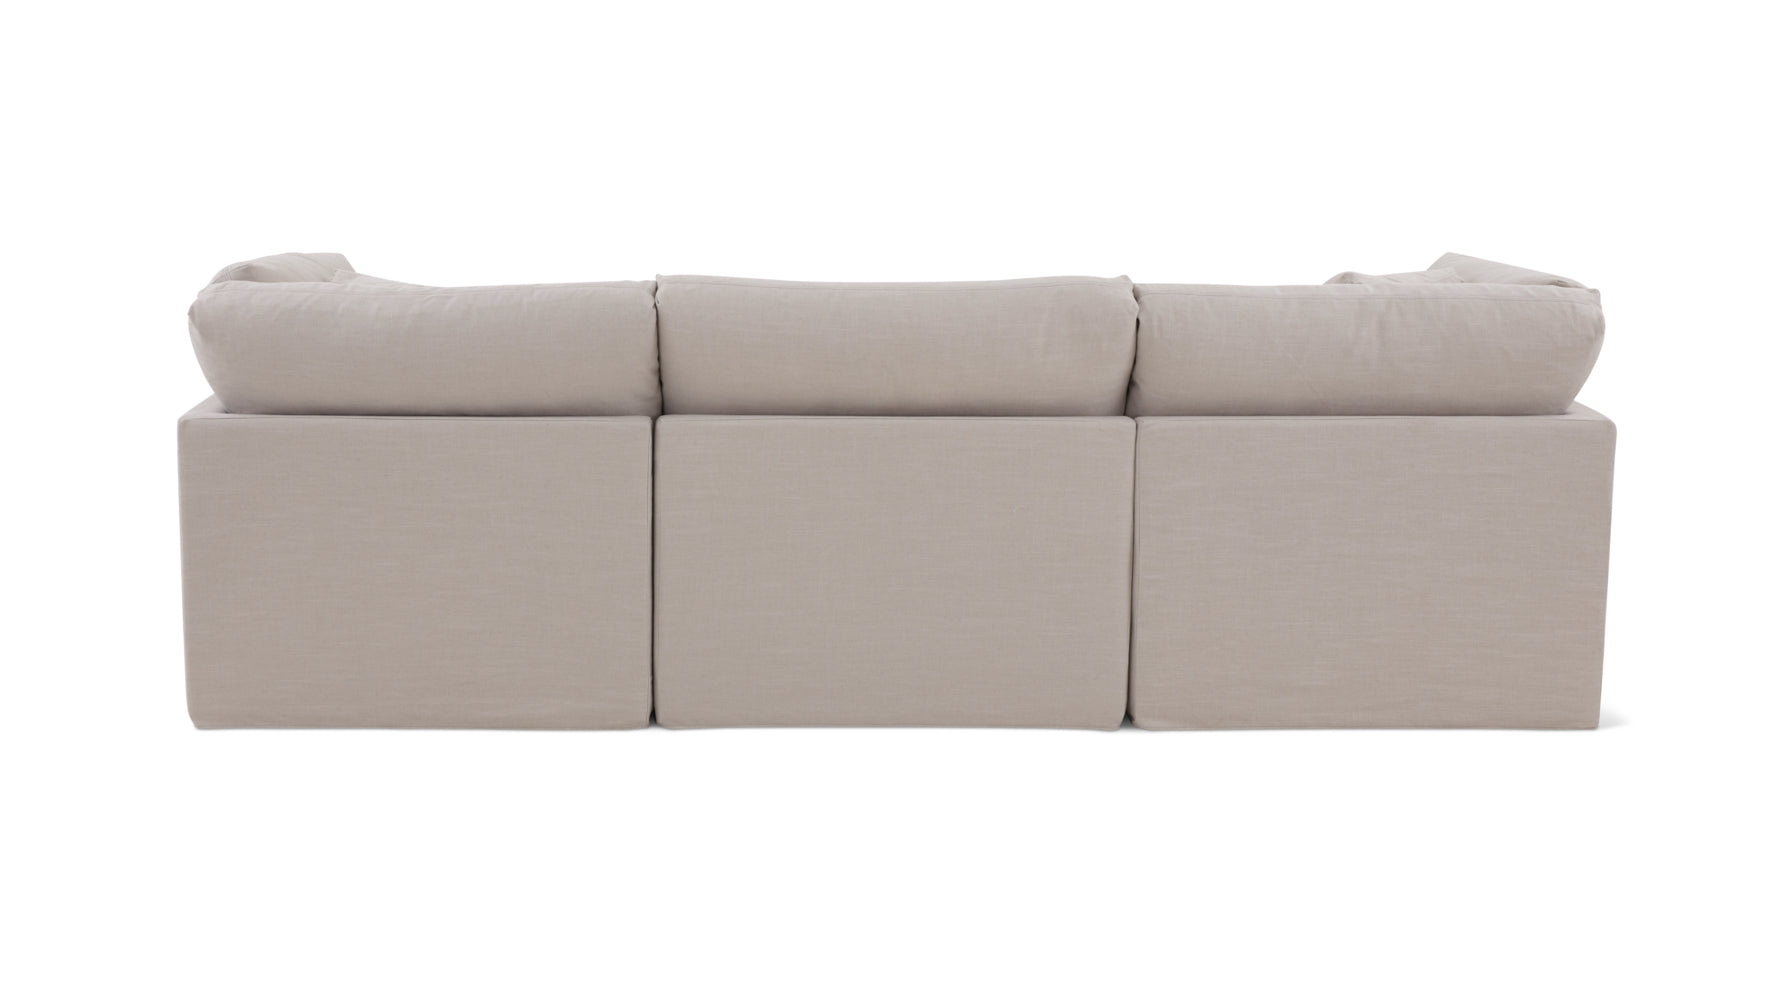 Get Together™ 5-Piece Modular U-Shaped Sectional, Standard, Clay - Image 7